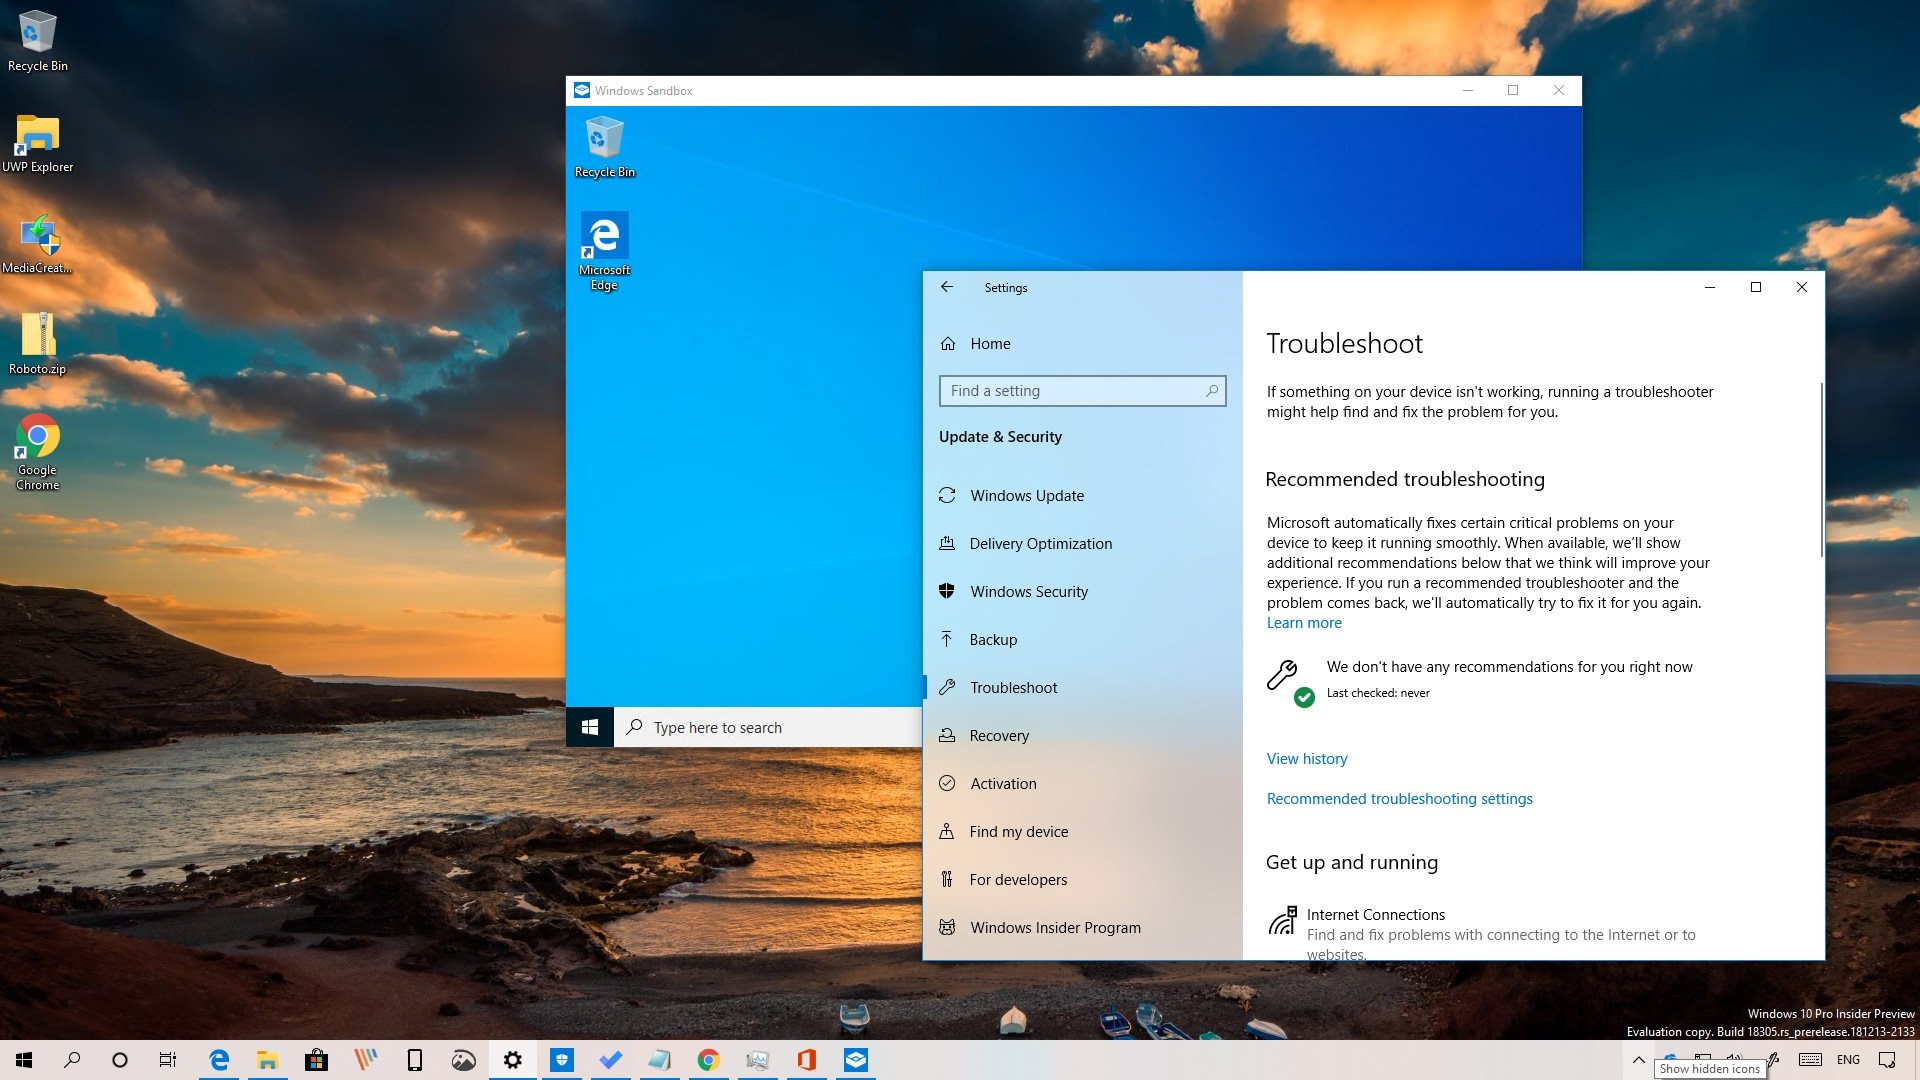 Windows 10 build 18305 Windows Sandbox and Recommended Troubleshooting